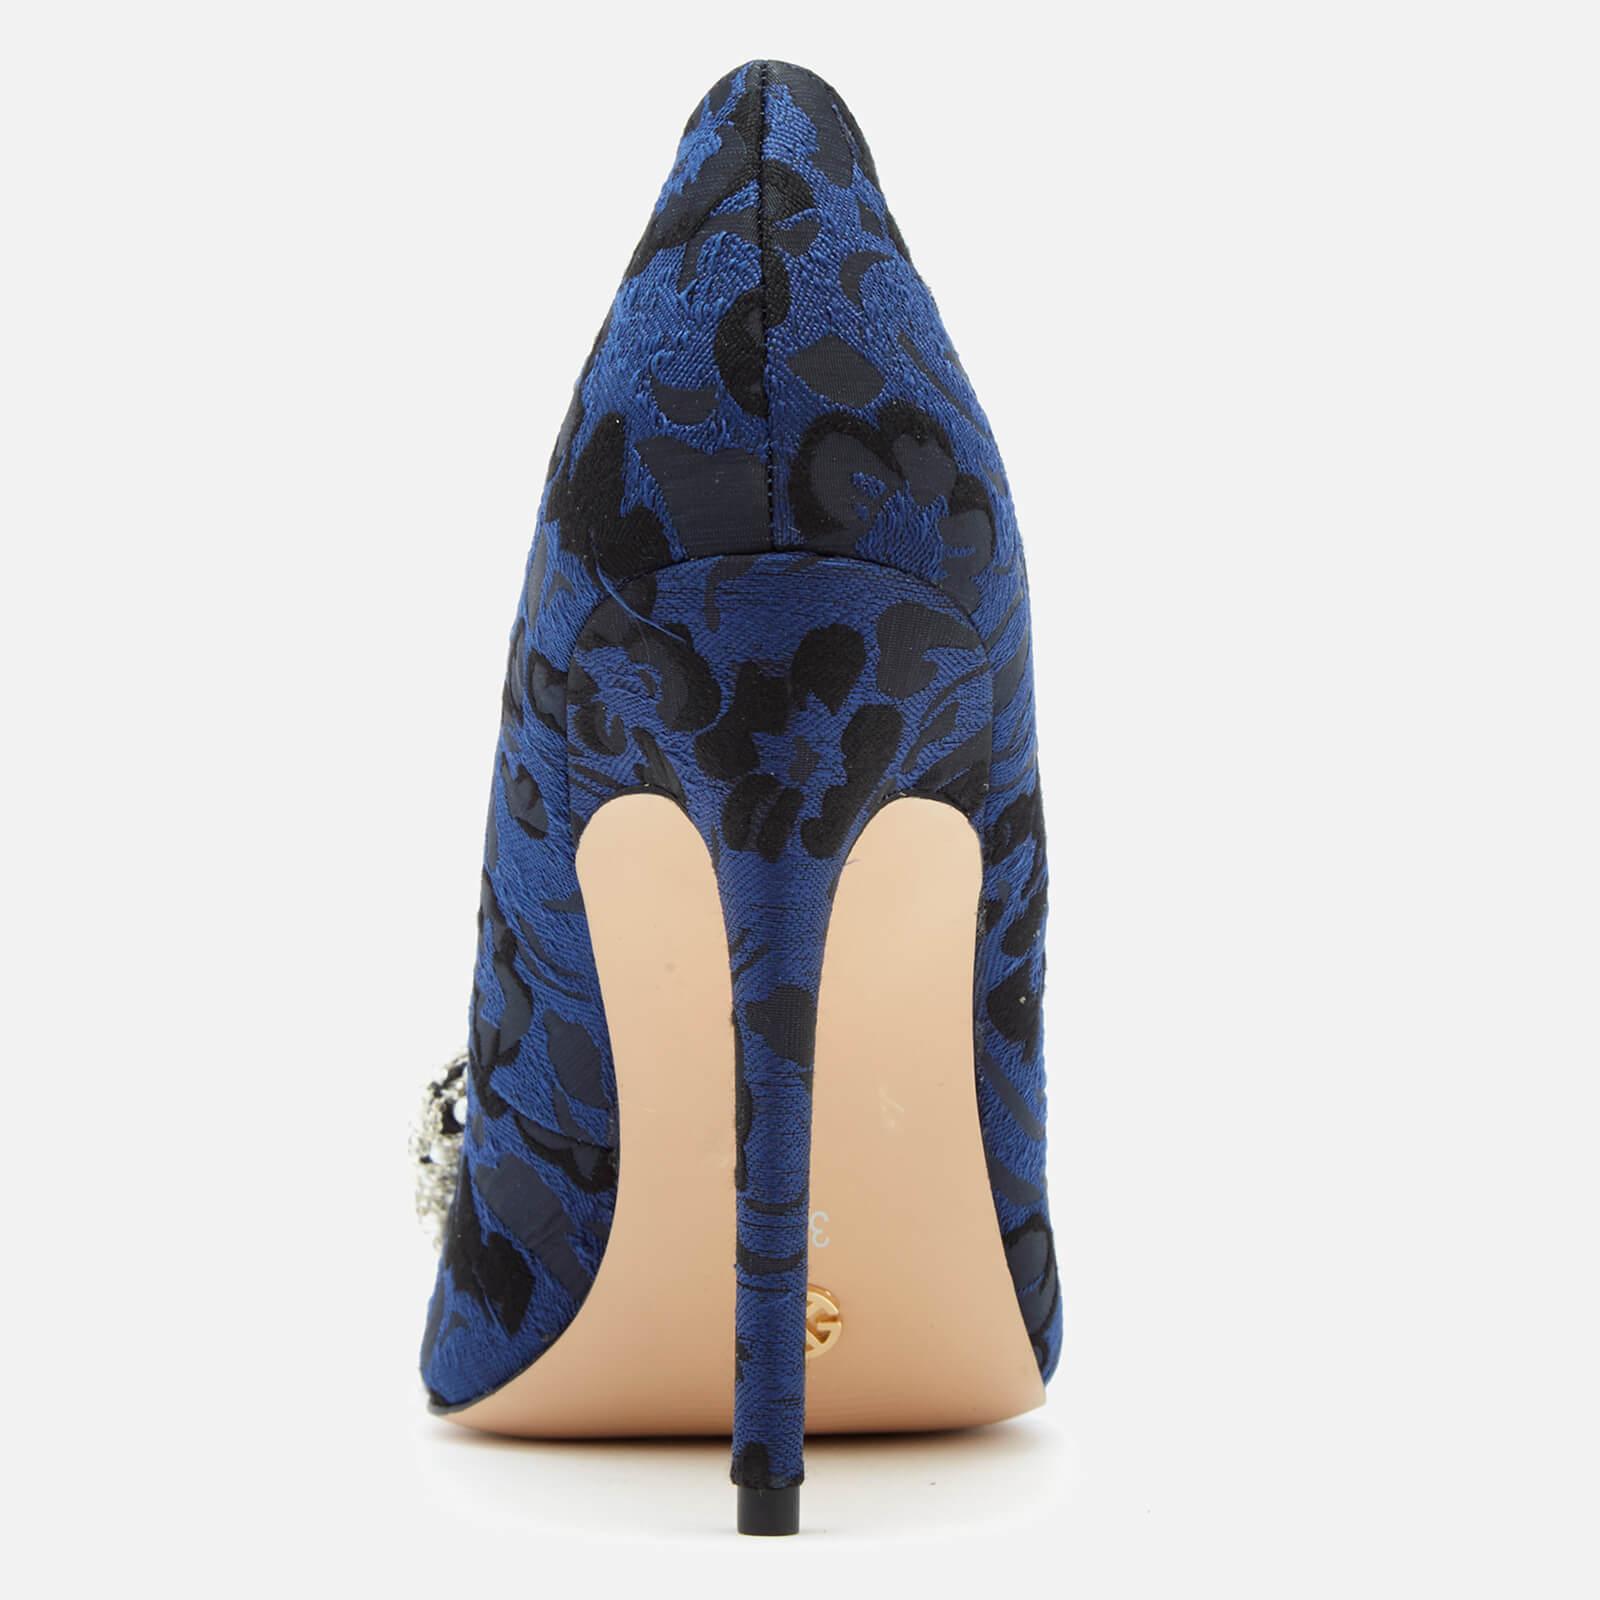 patterned court shoes